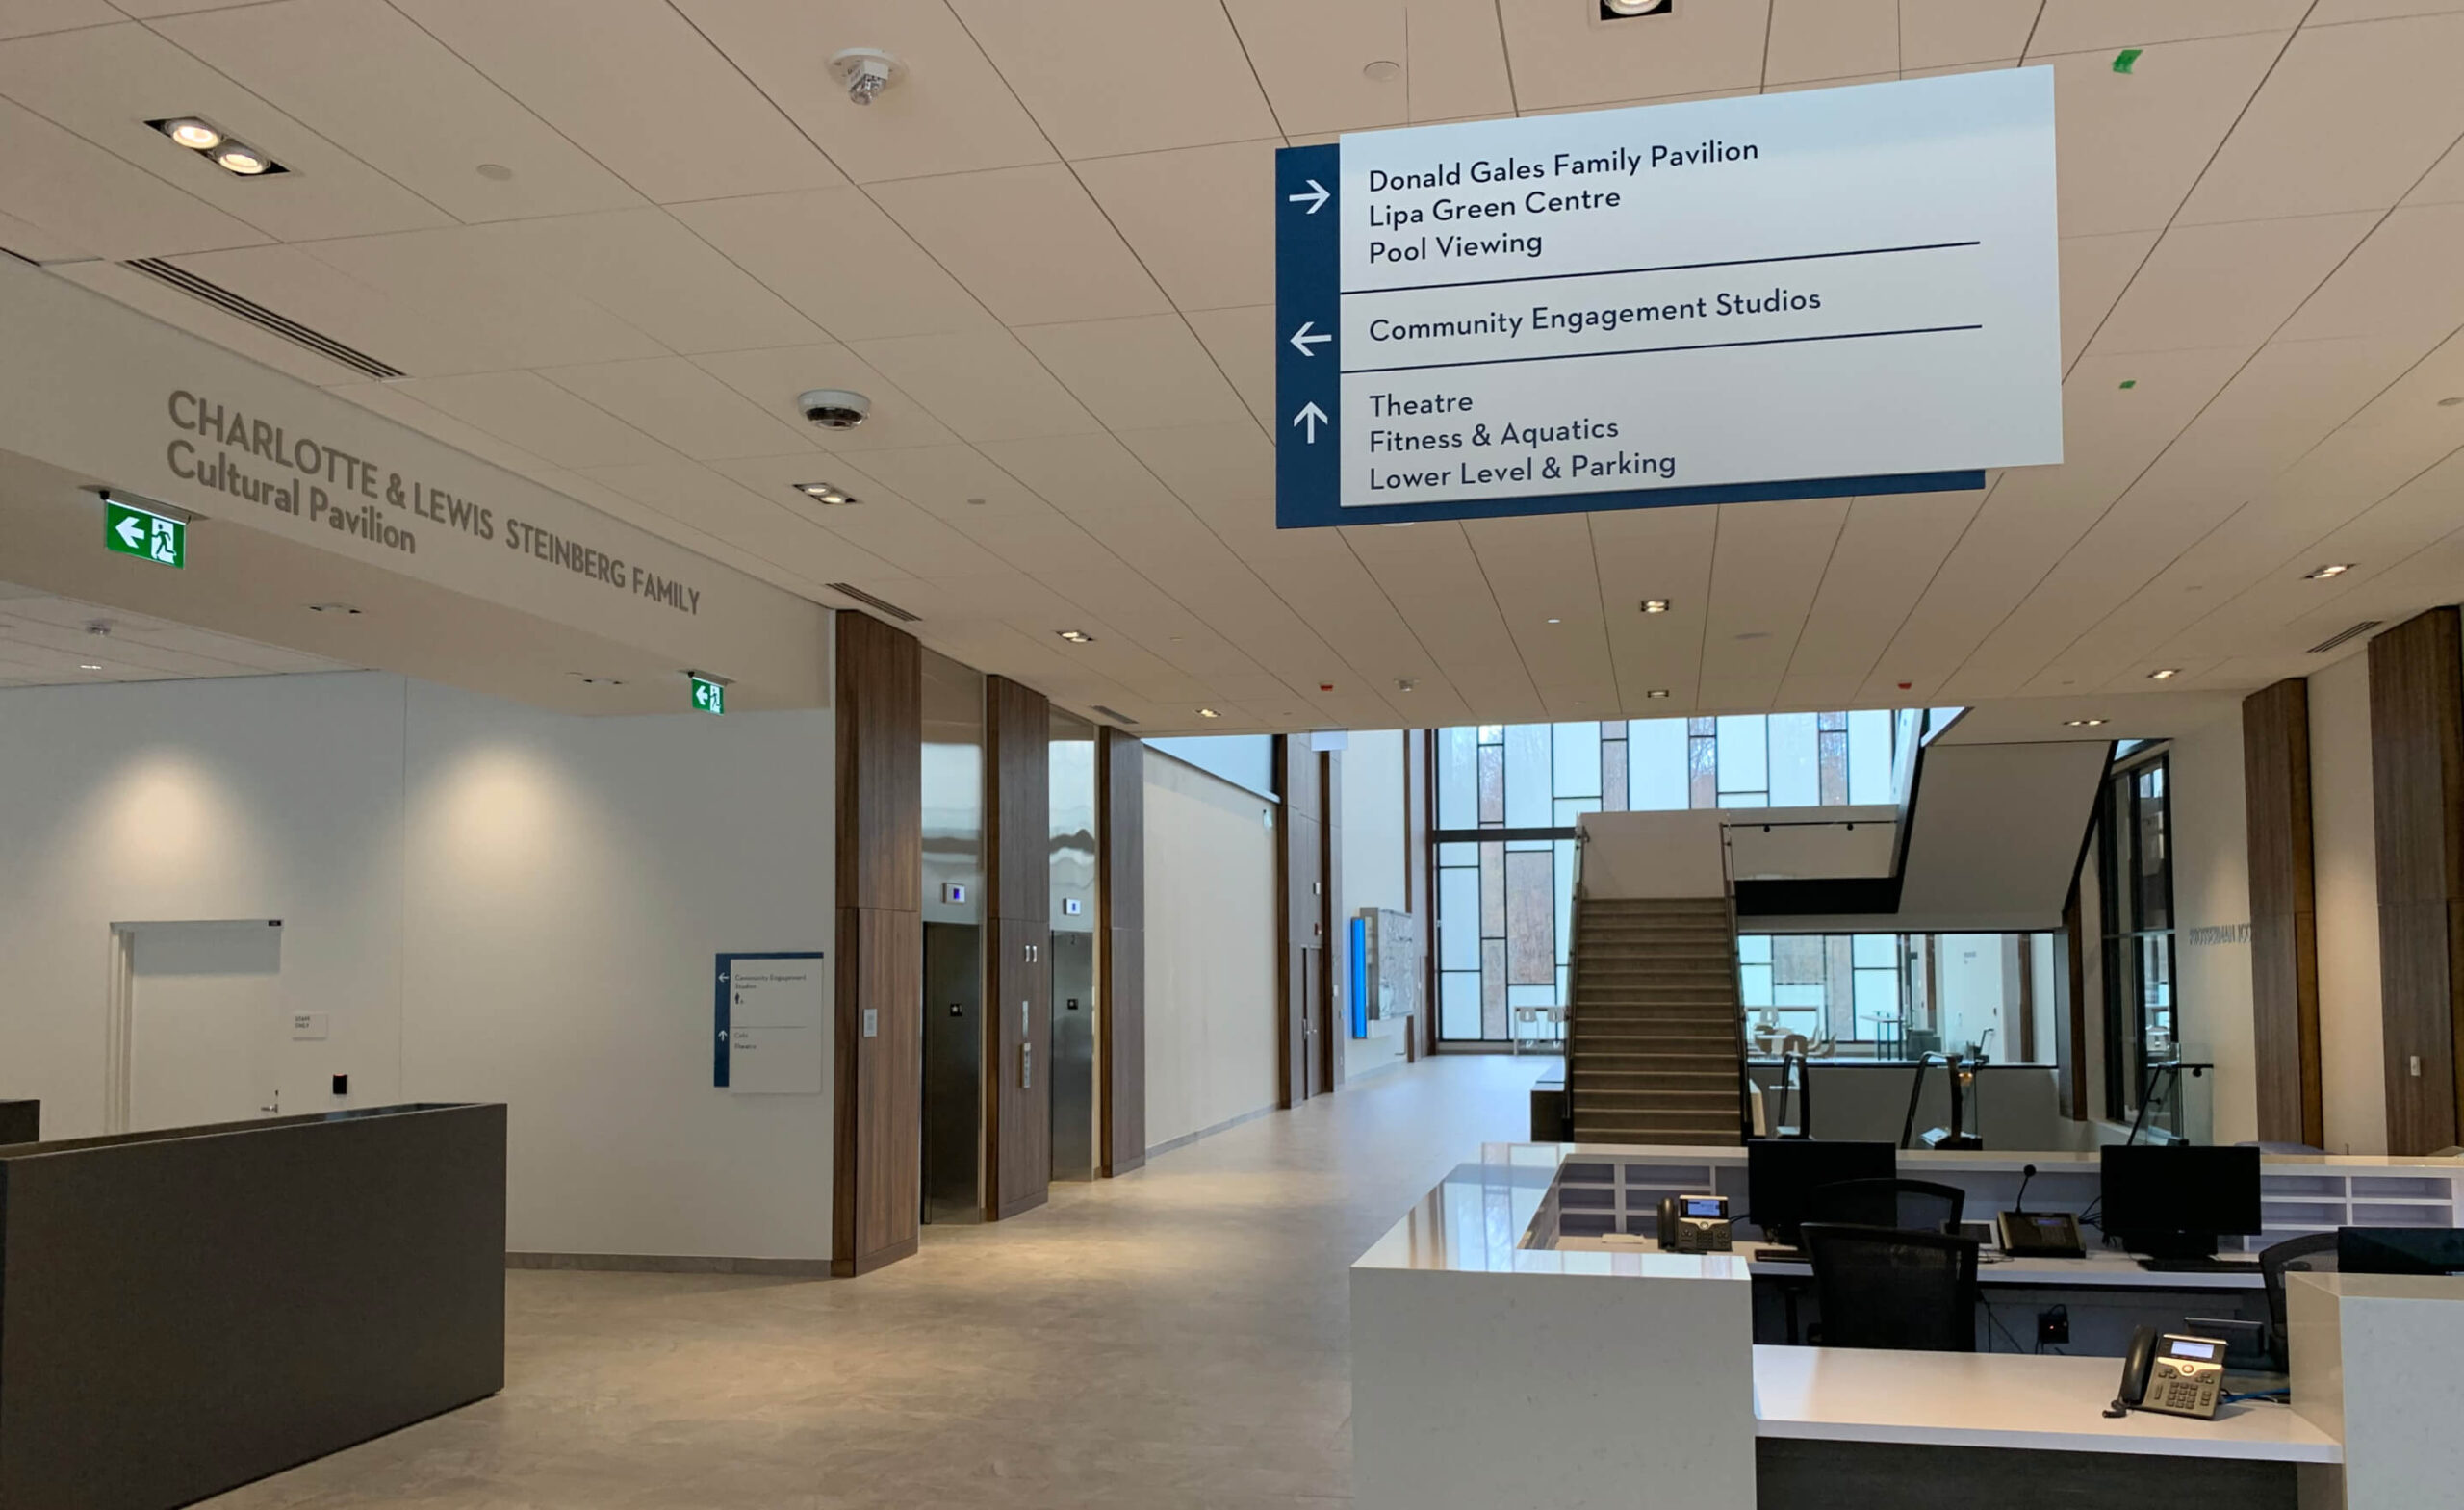 Interior of UJA building, with a focus on wayfinding signage.